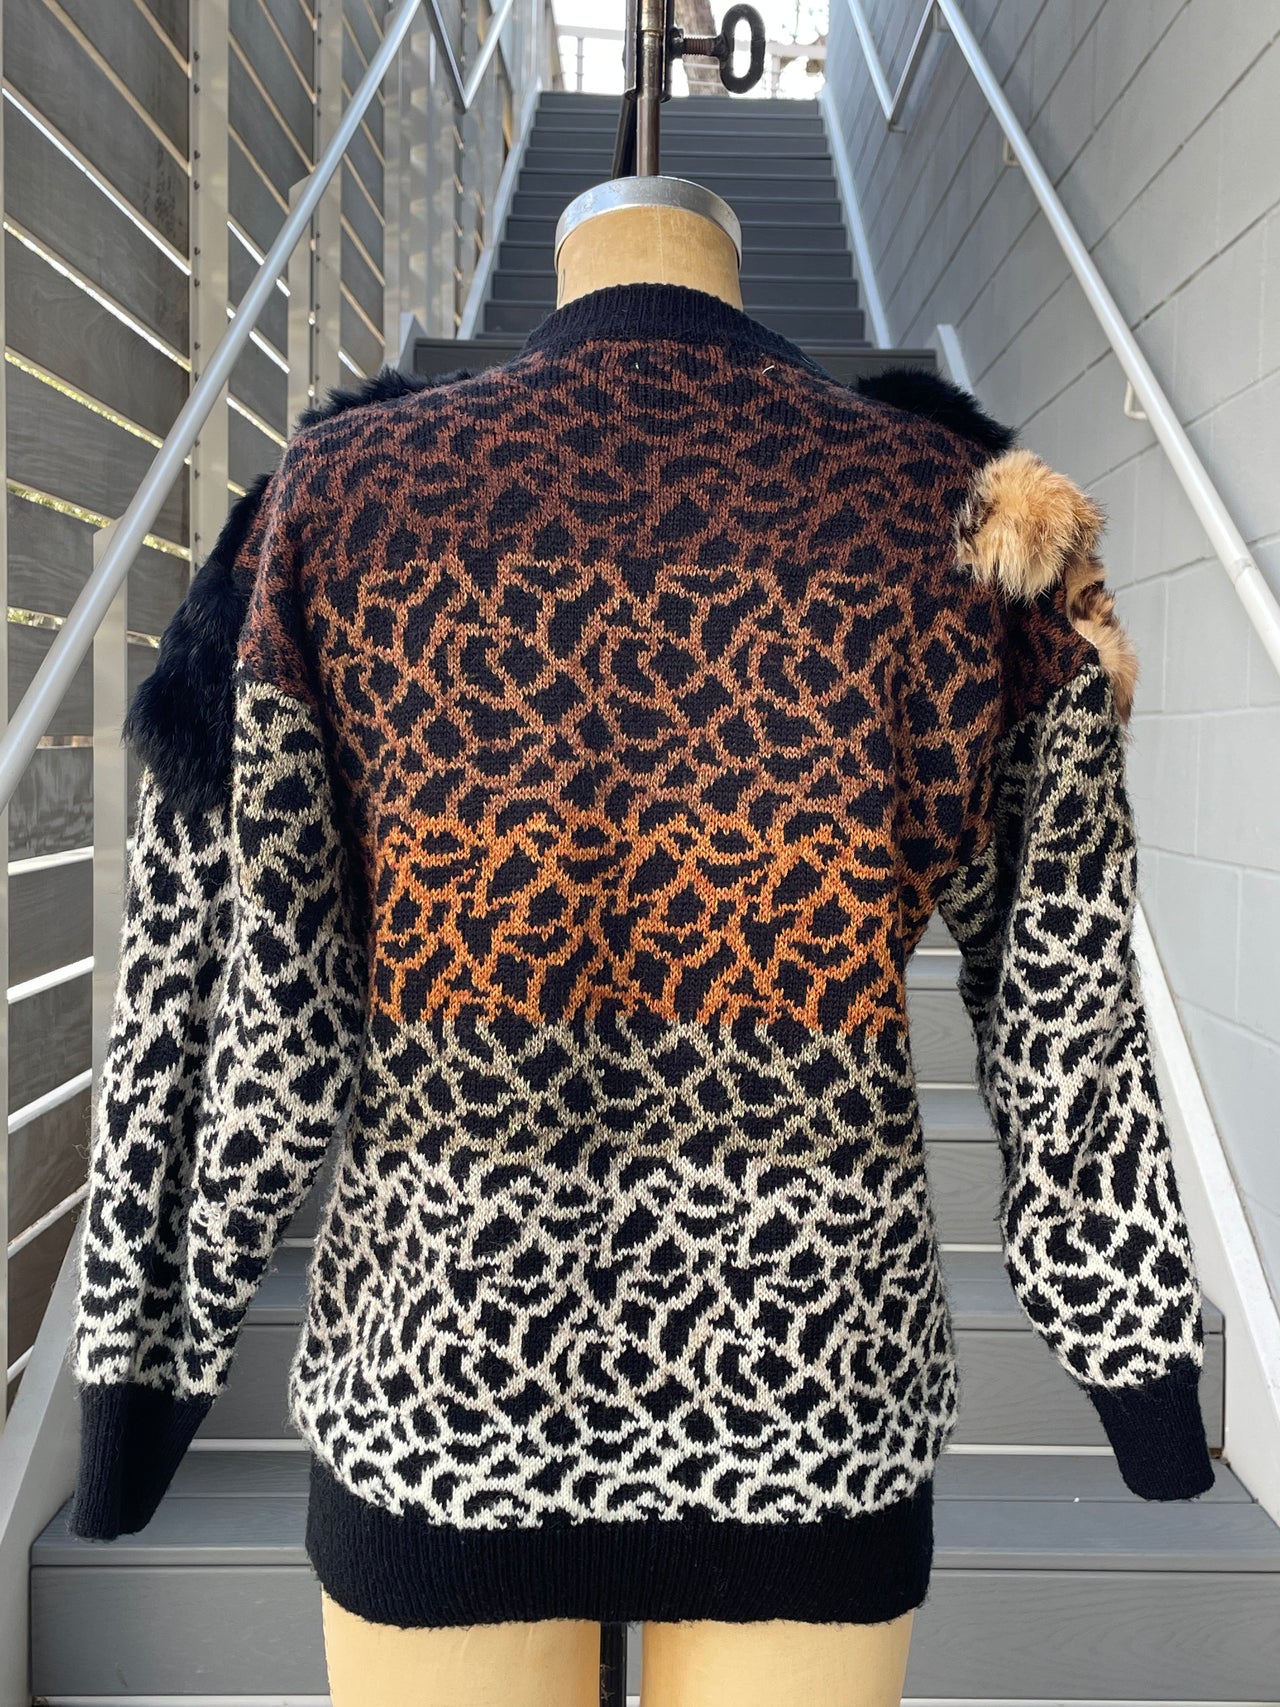 1980s Mariea Kim Animal Print Sweater with Faux Fur Accents Bloomers and Frocks 